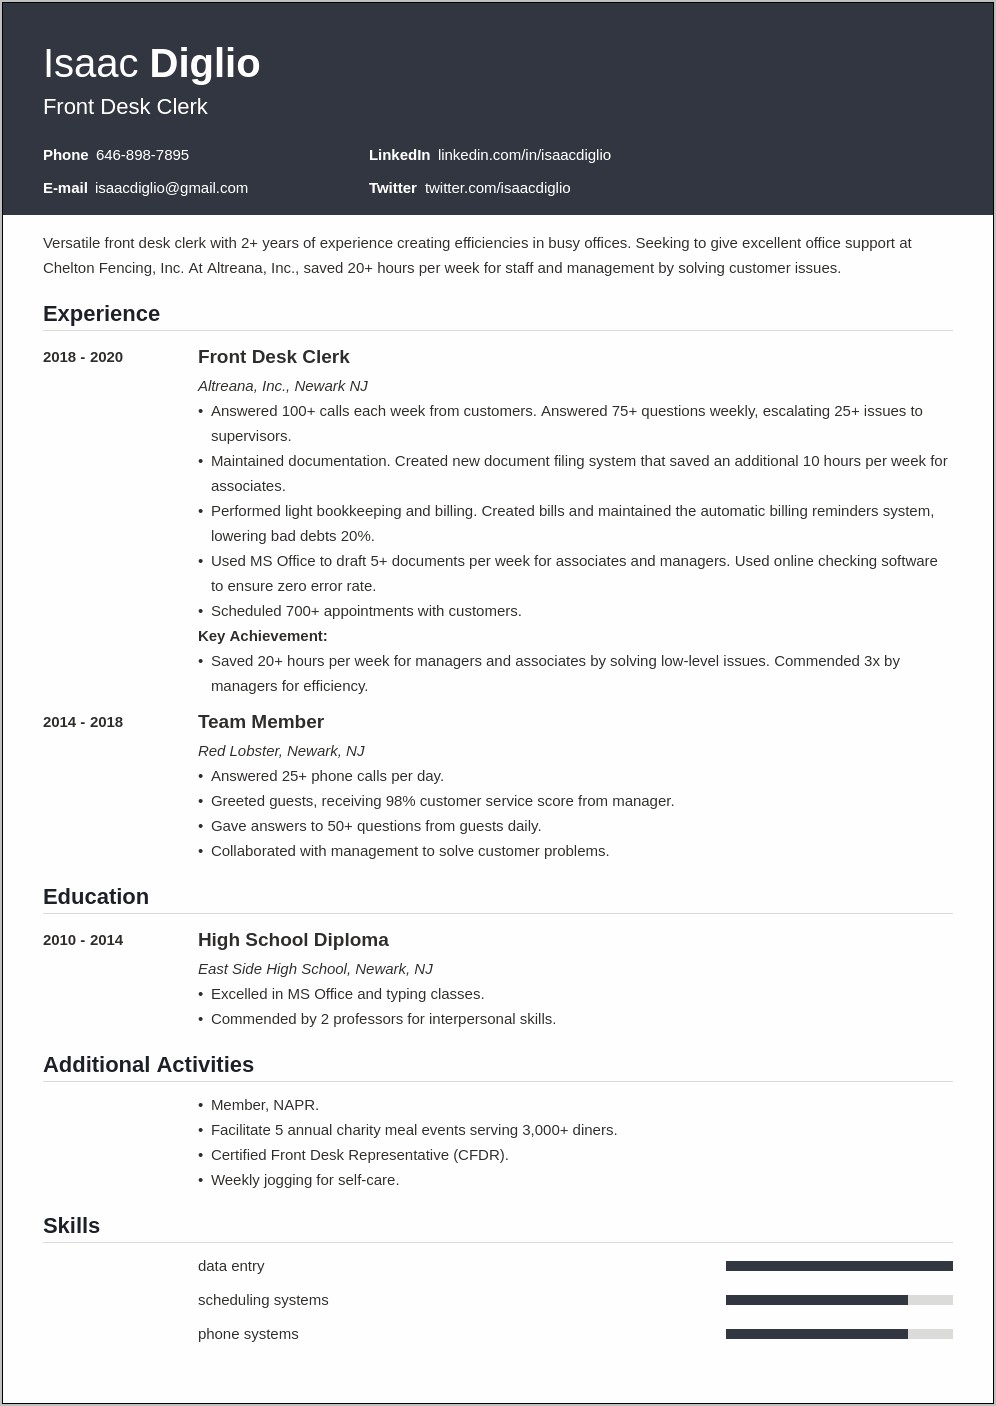 Resume Objective Examples For Receptionidst